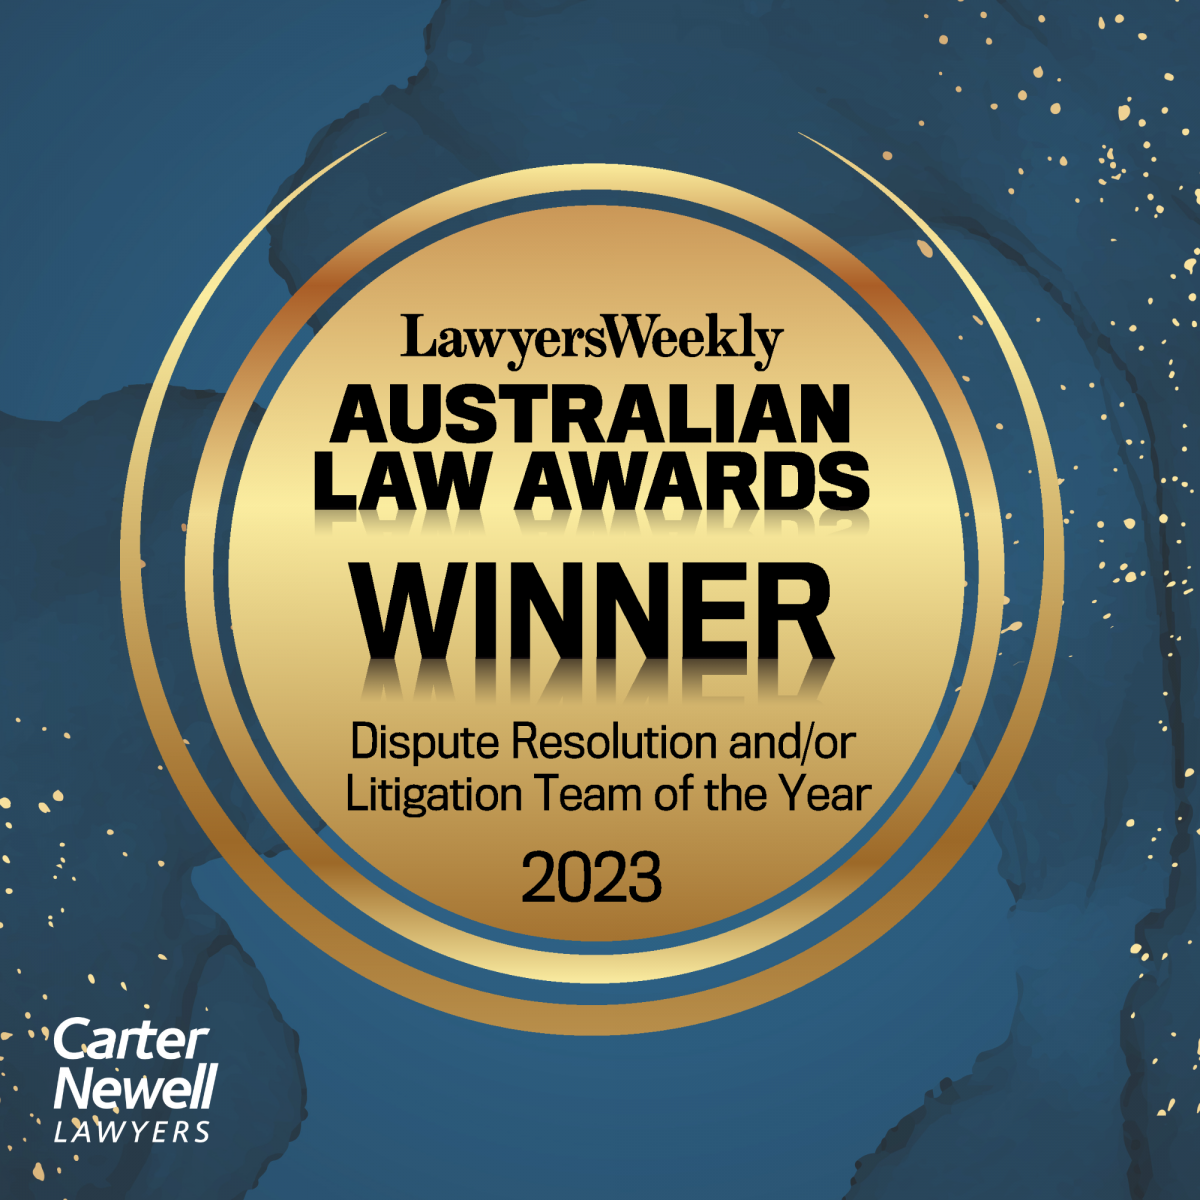 Carter Newell’s Construction & Engineering team wins at The Australian Law Awards